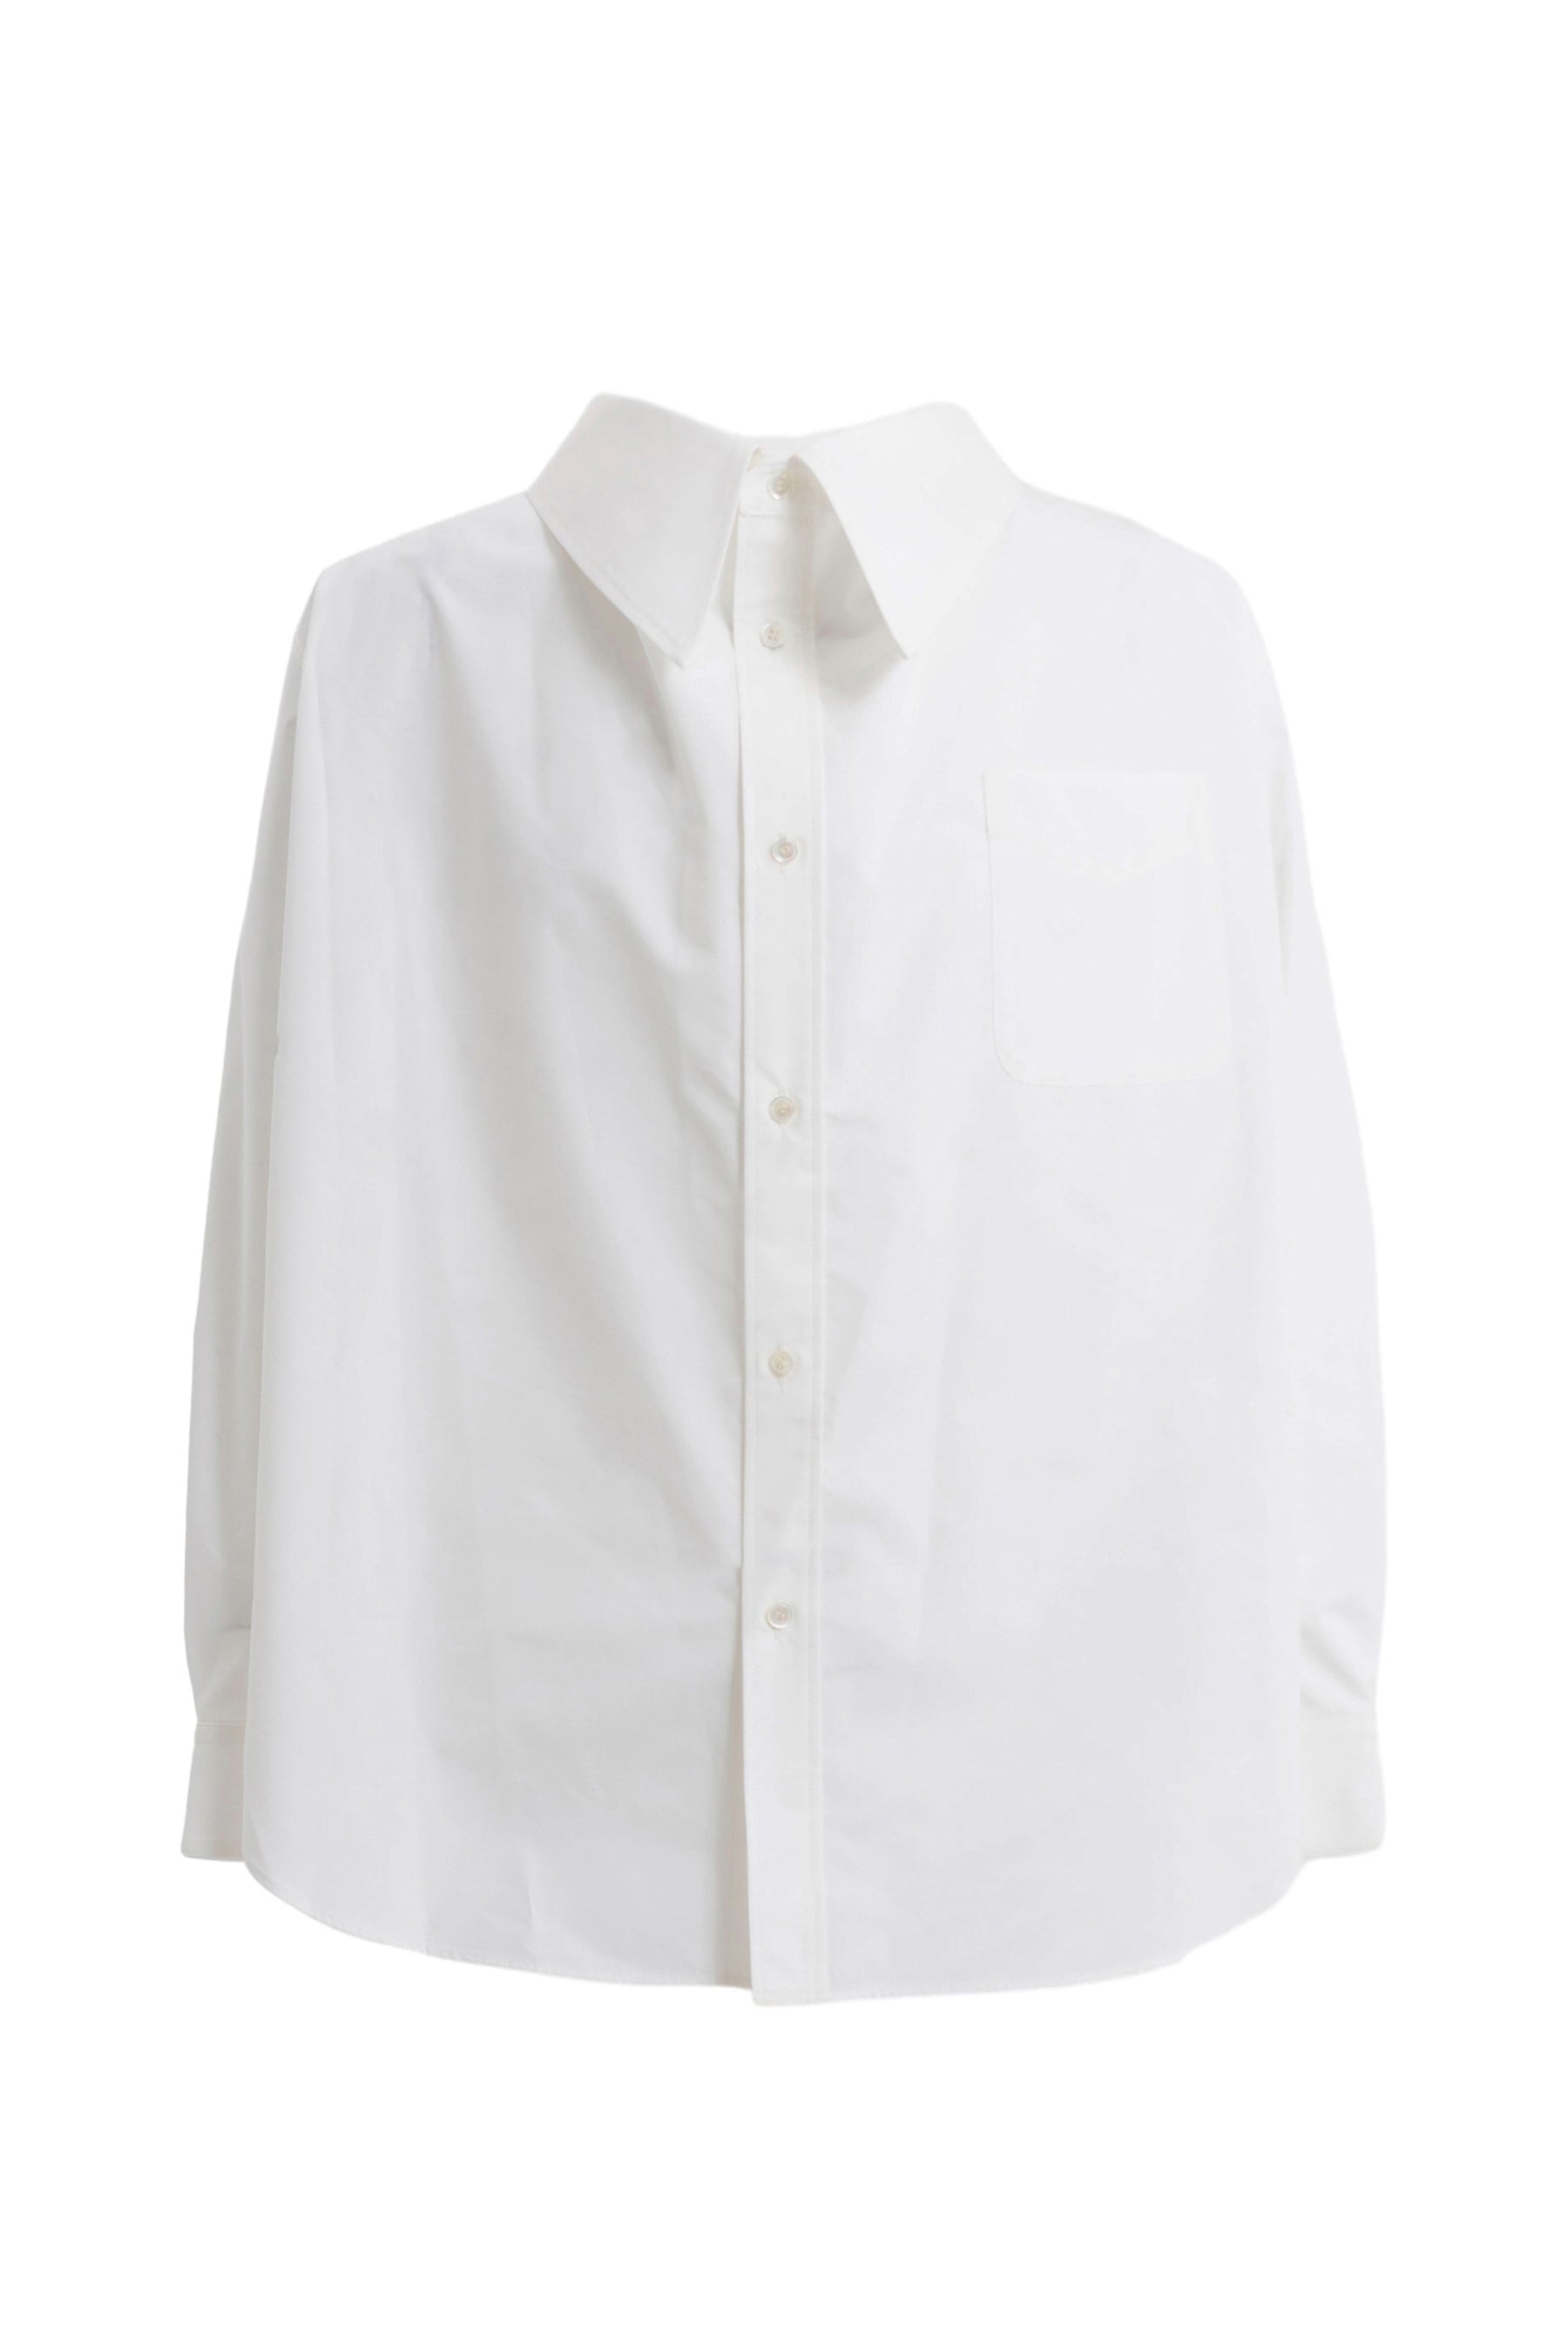 TOGA ARCHIVES FW23 BROAD WIDE OPEN SHIRT / WHT -NUBIAN